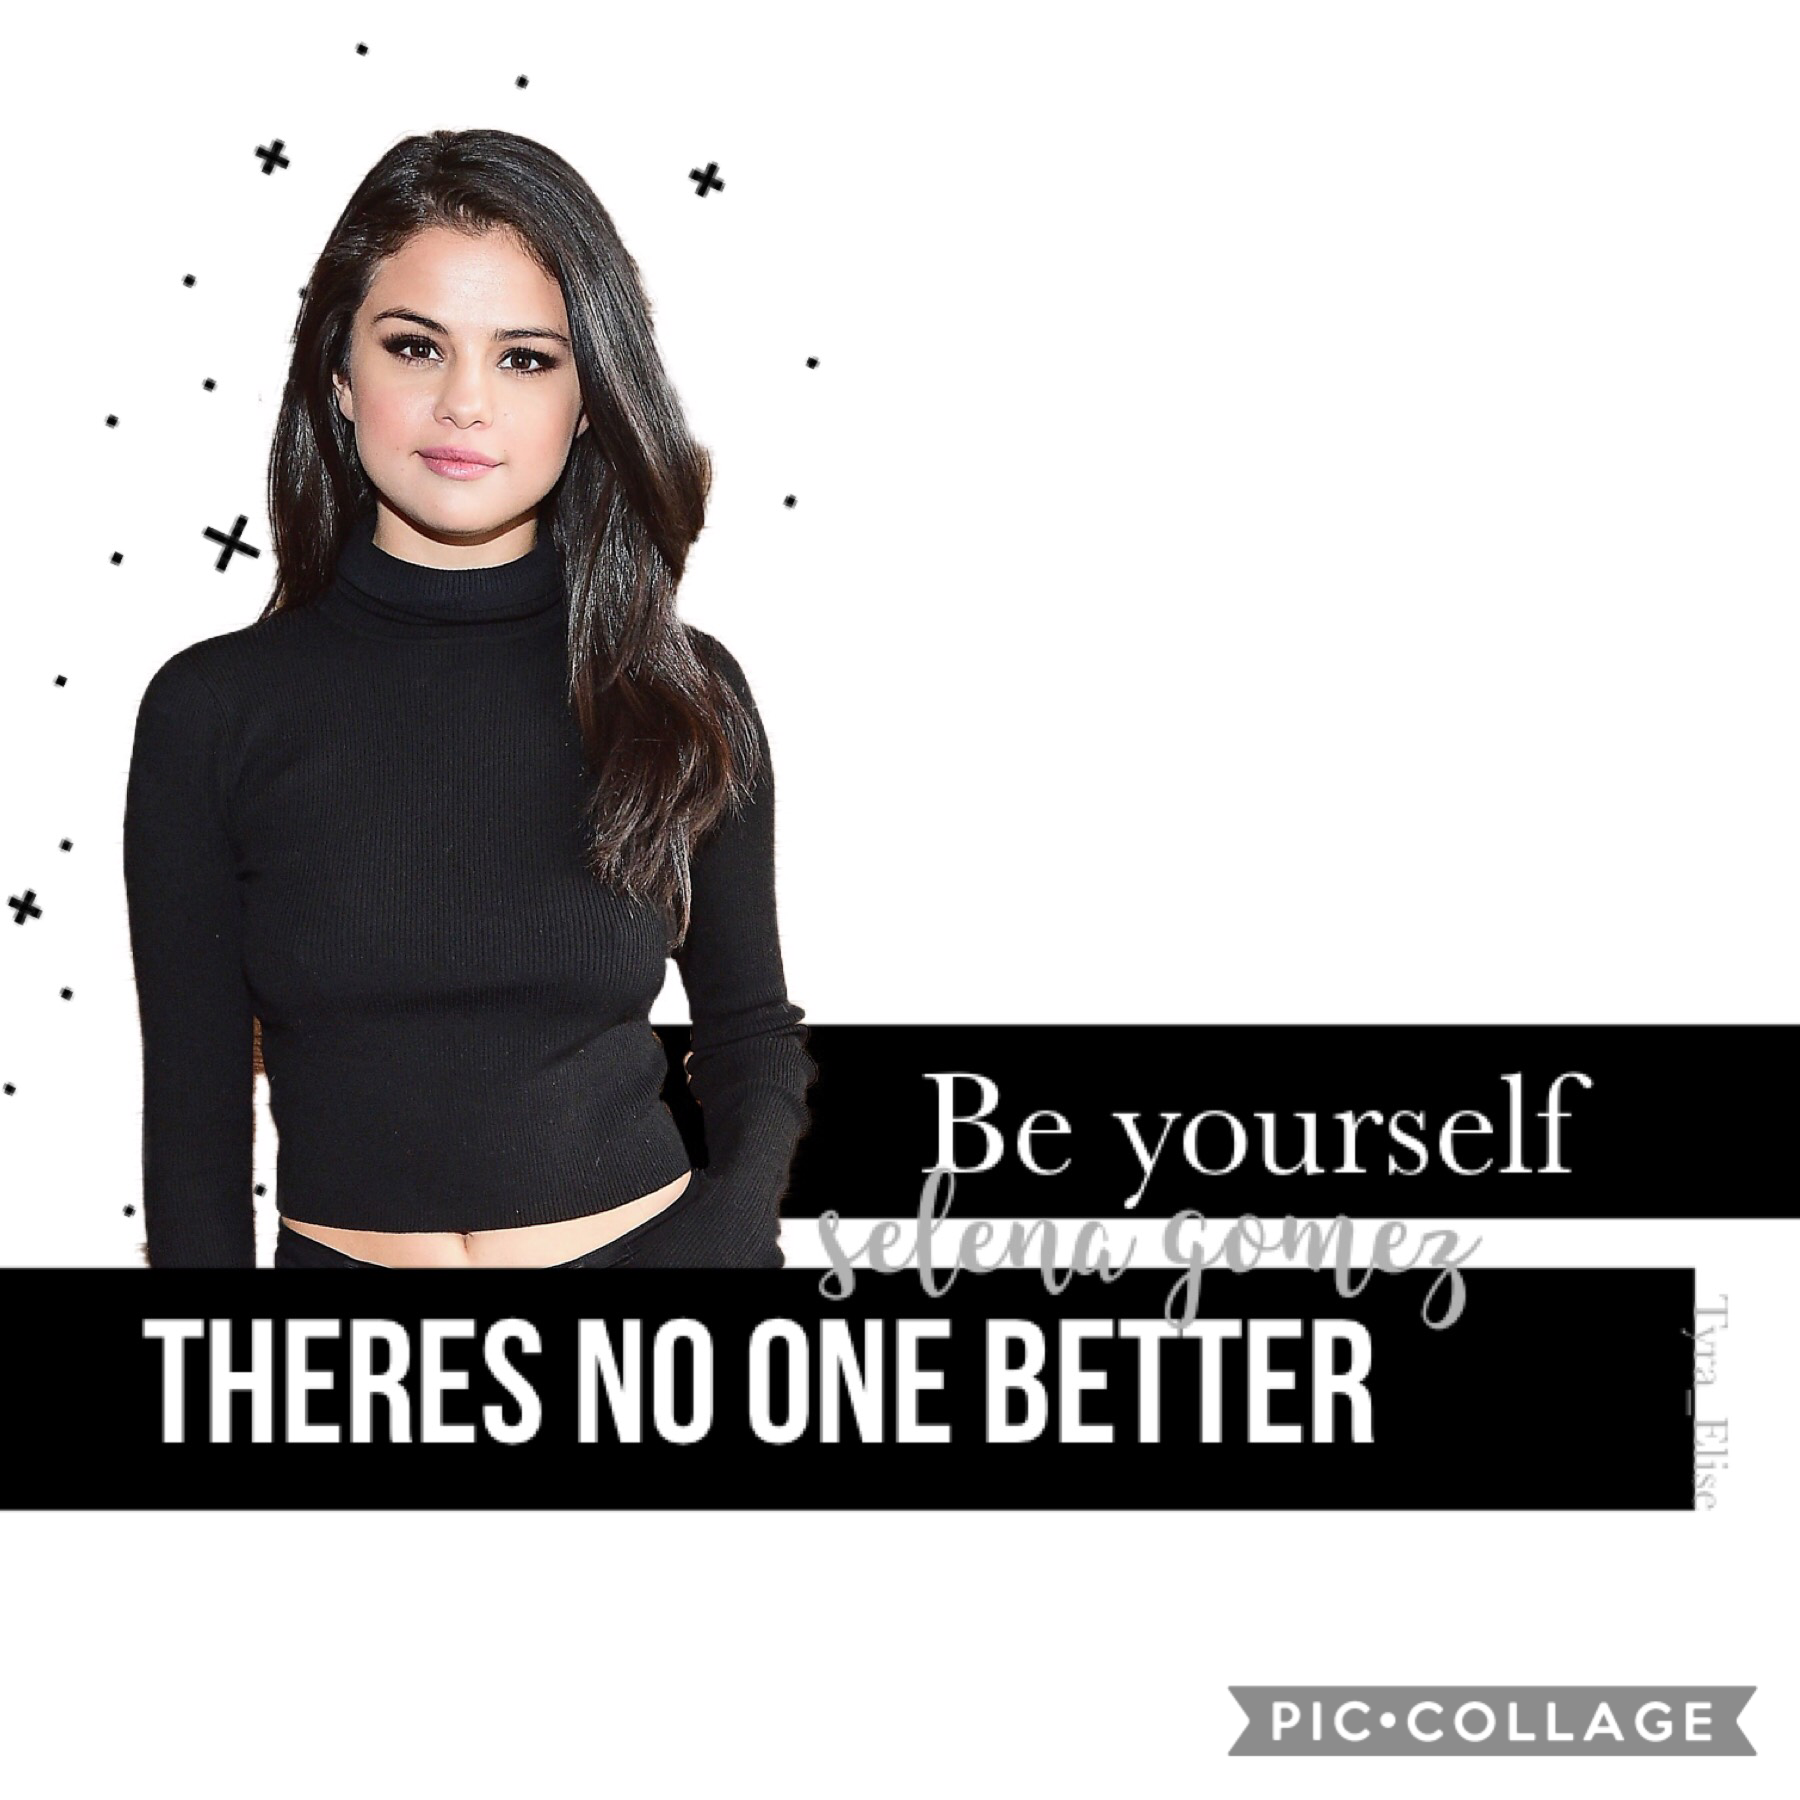 💜Tap💜
A very simple edit I made. 💙  
Qotd: Favorite song of Selena Gomez?
Aotd: Back To You 💞
💜11/5/18💜